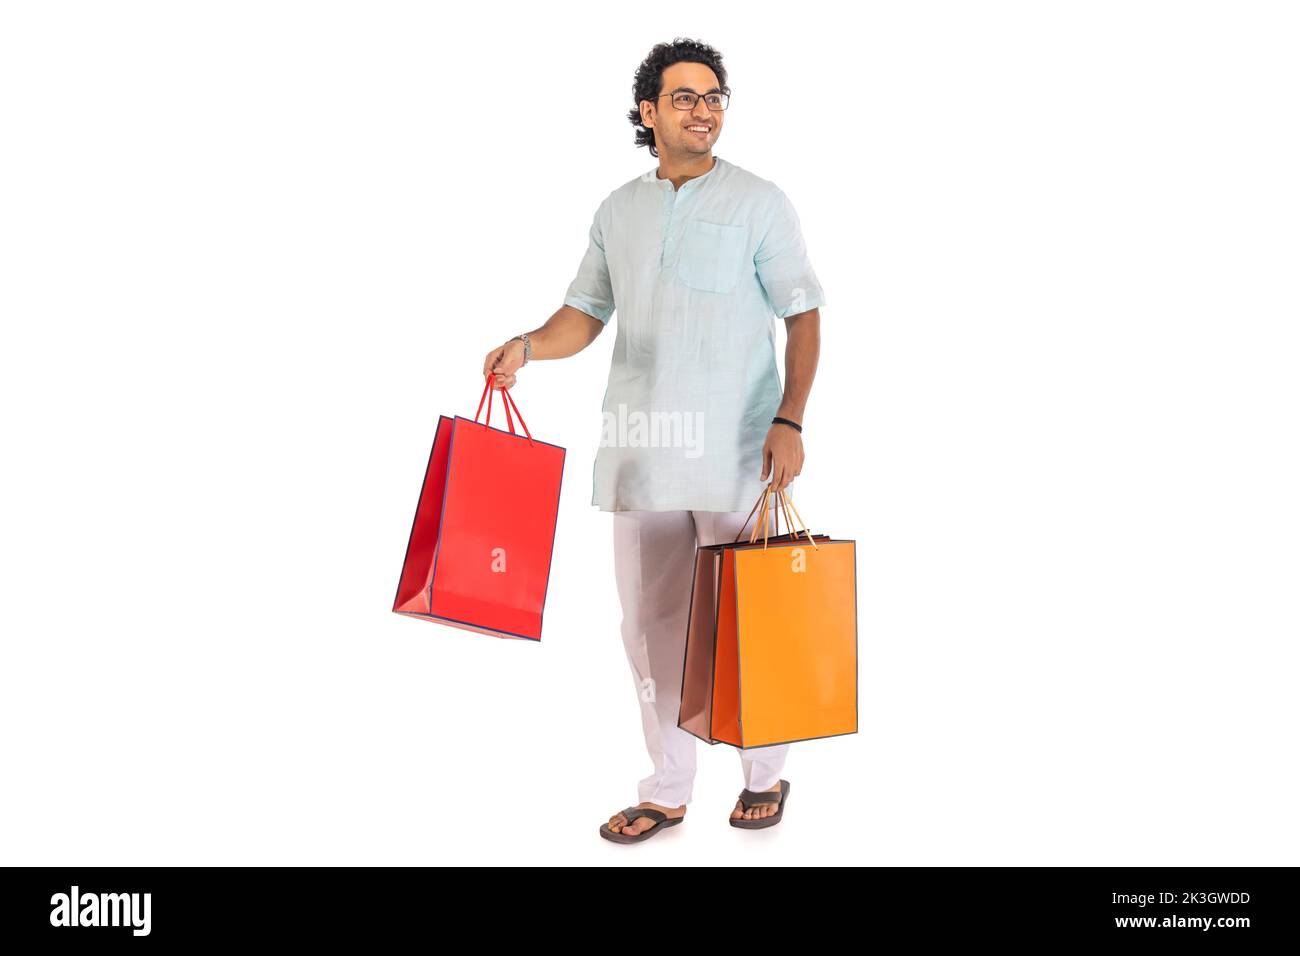 Man carrying shopping bags Cut Out Stock Images & Pictures - Alamy